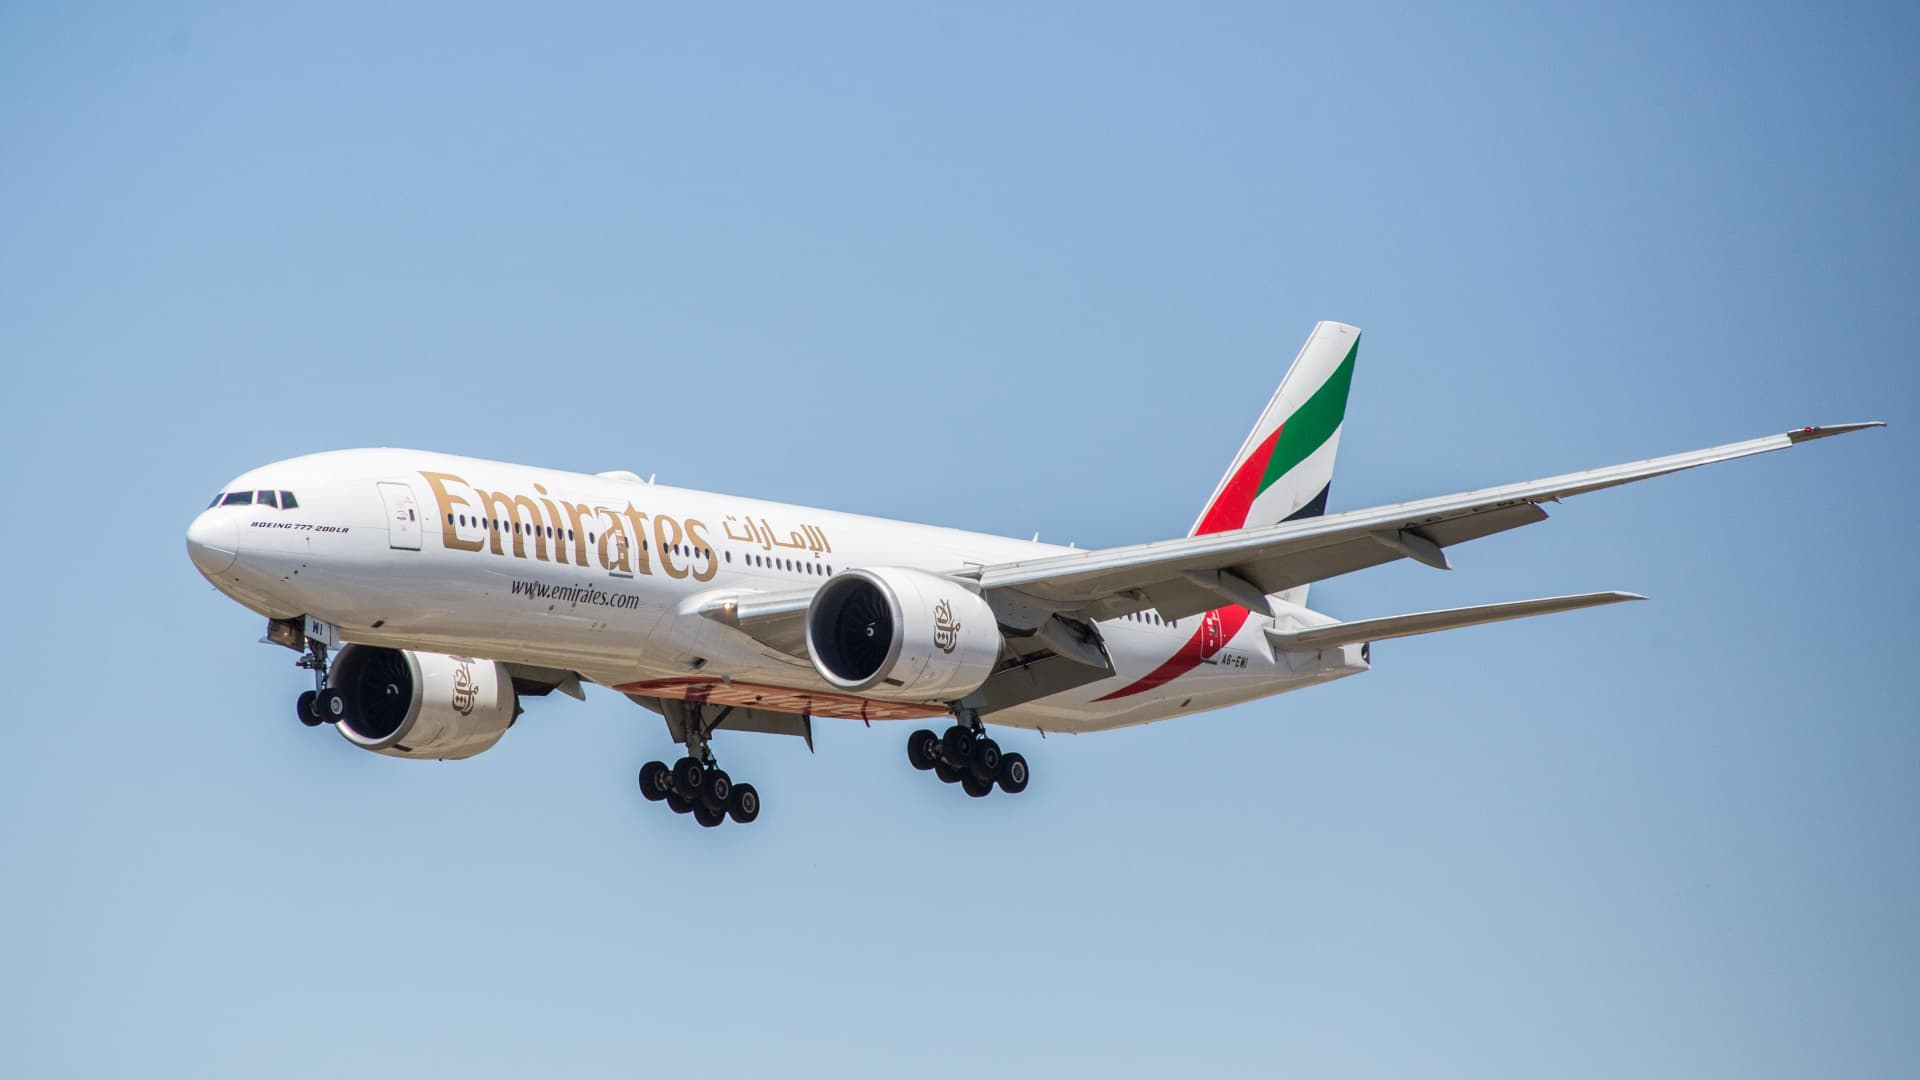 Emirates Airline slams Heathrow Airport’s ‘unacceptable’ demand to cut flights refuses to comply – CNBC